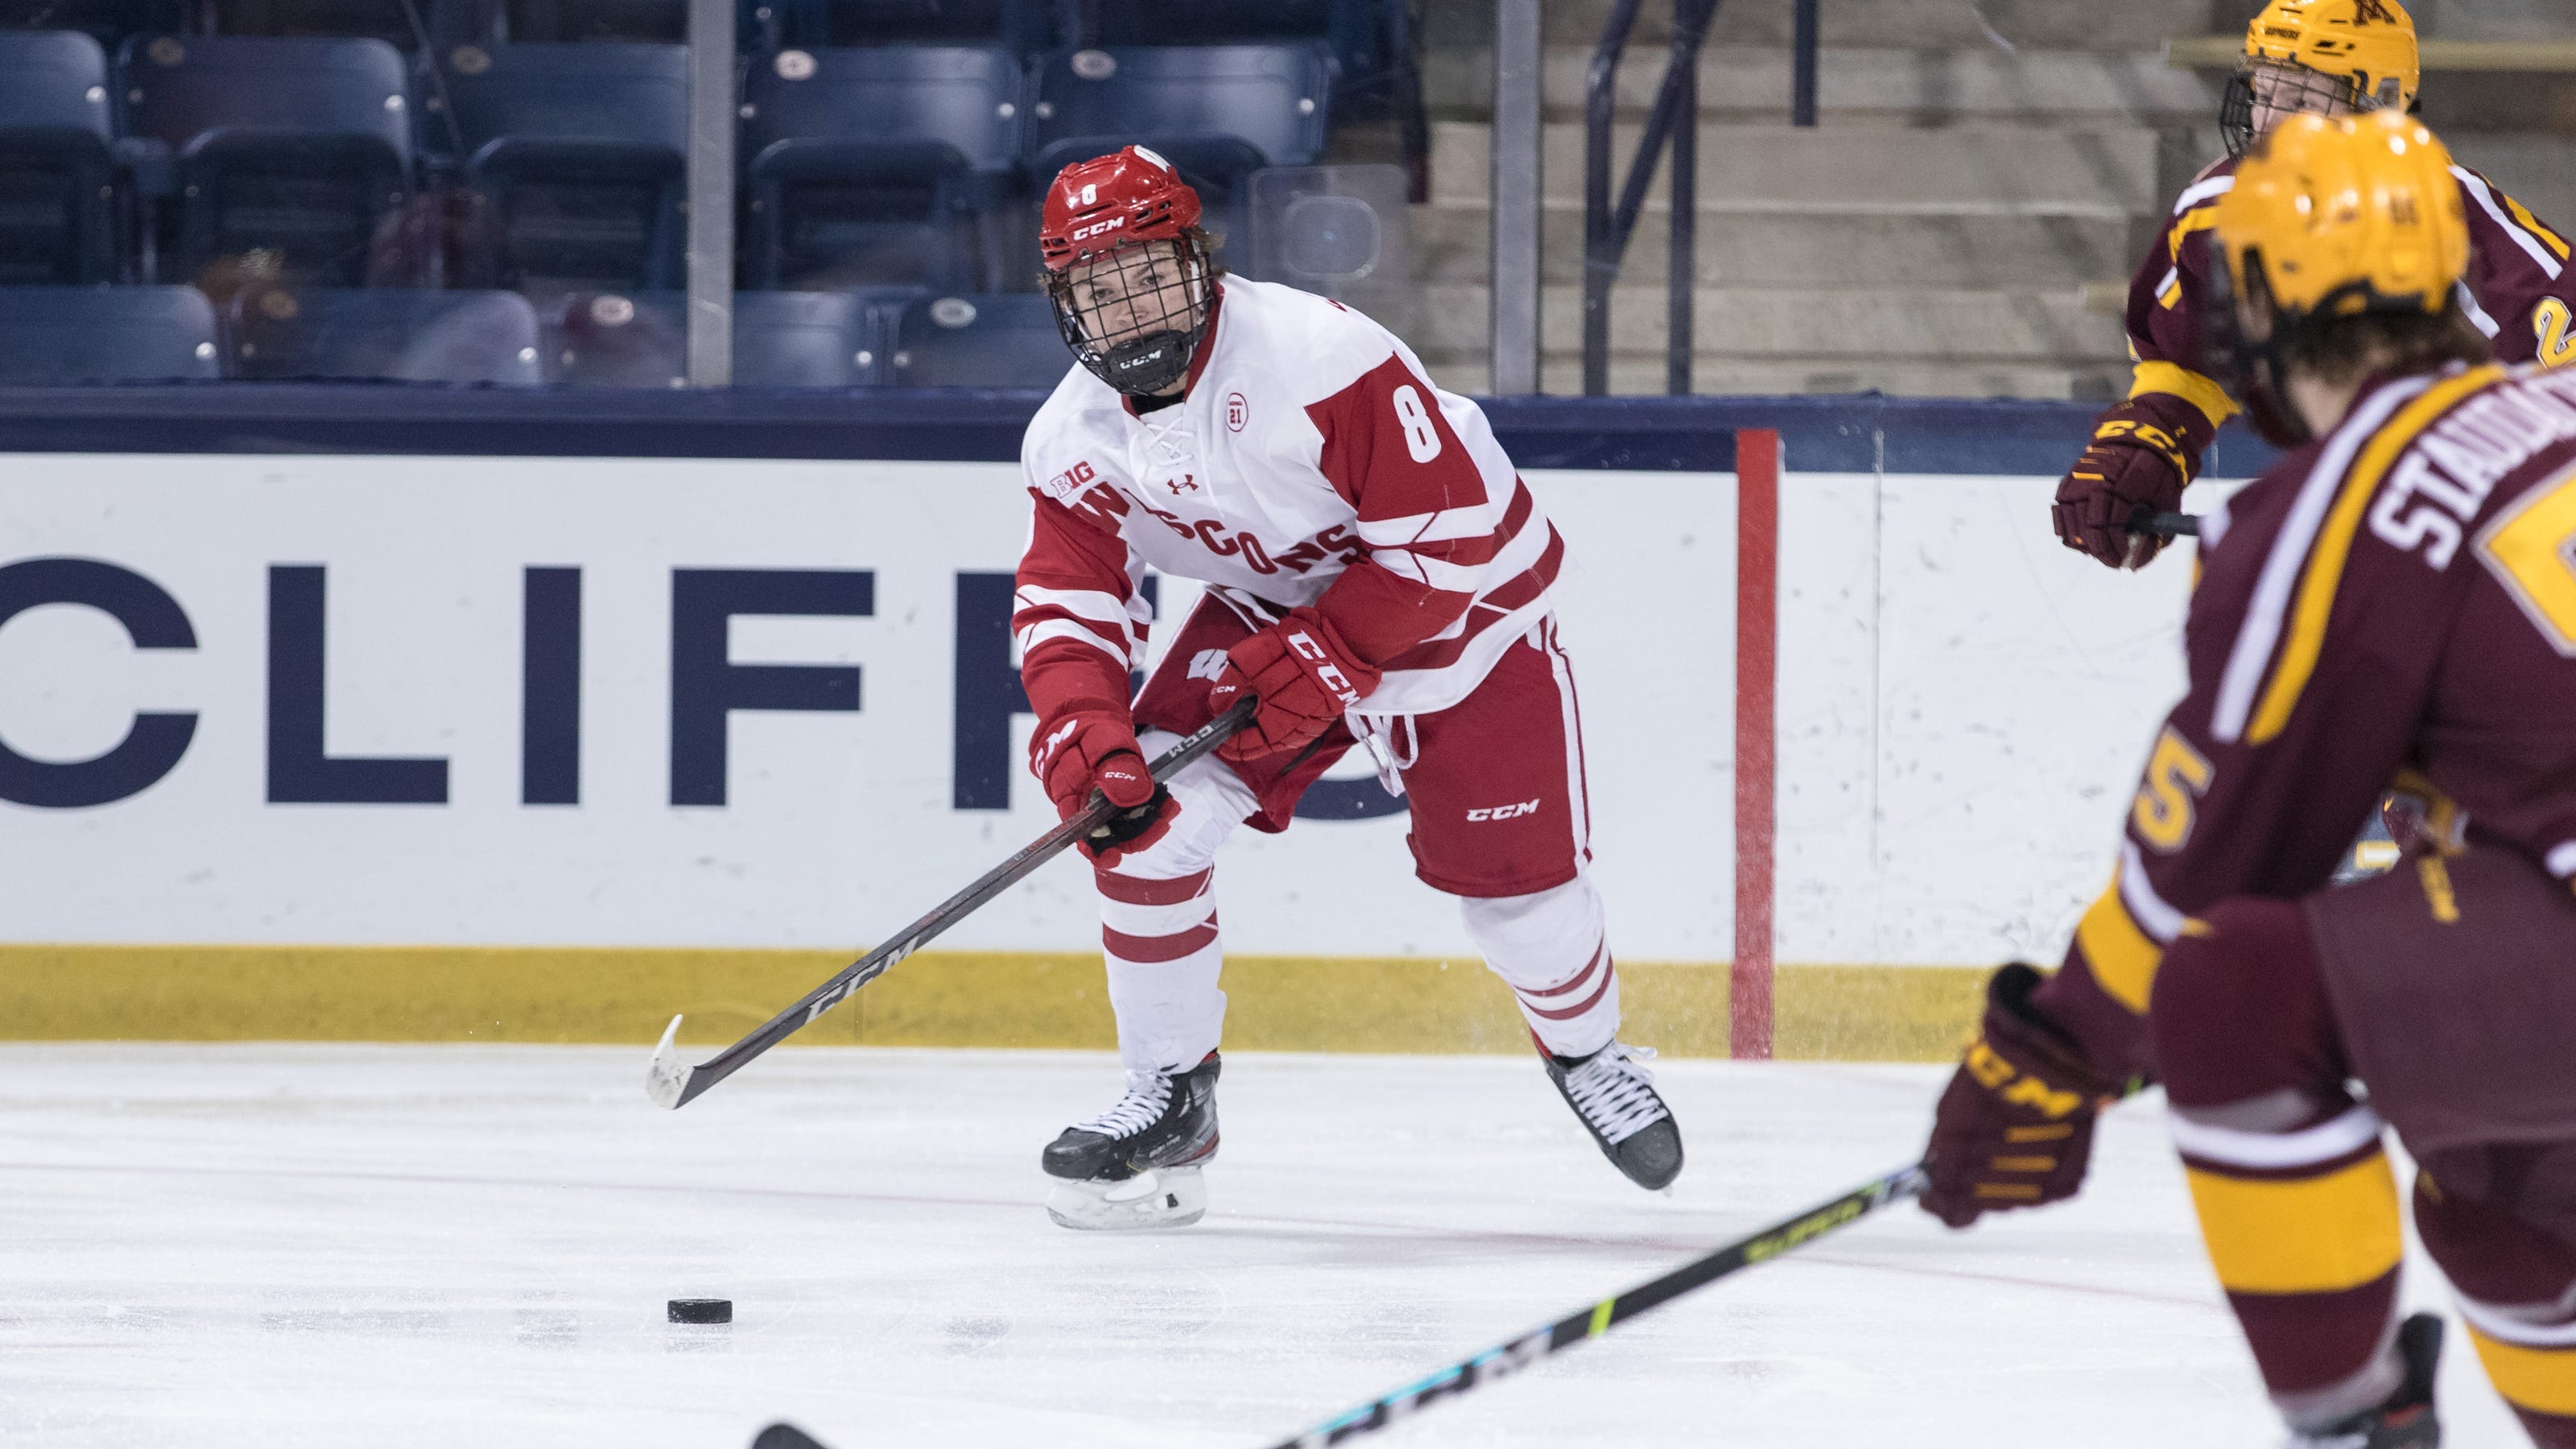 Wisconsin men's hockey team chasing seventh NCAA national title